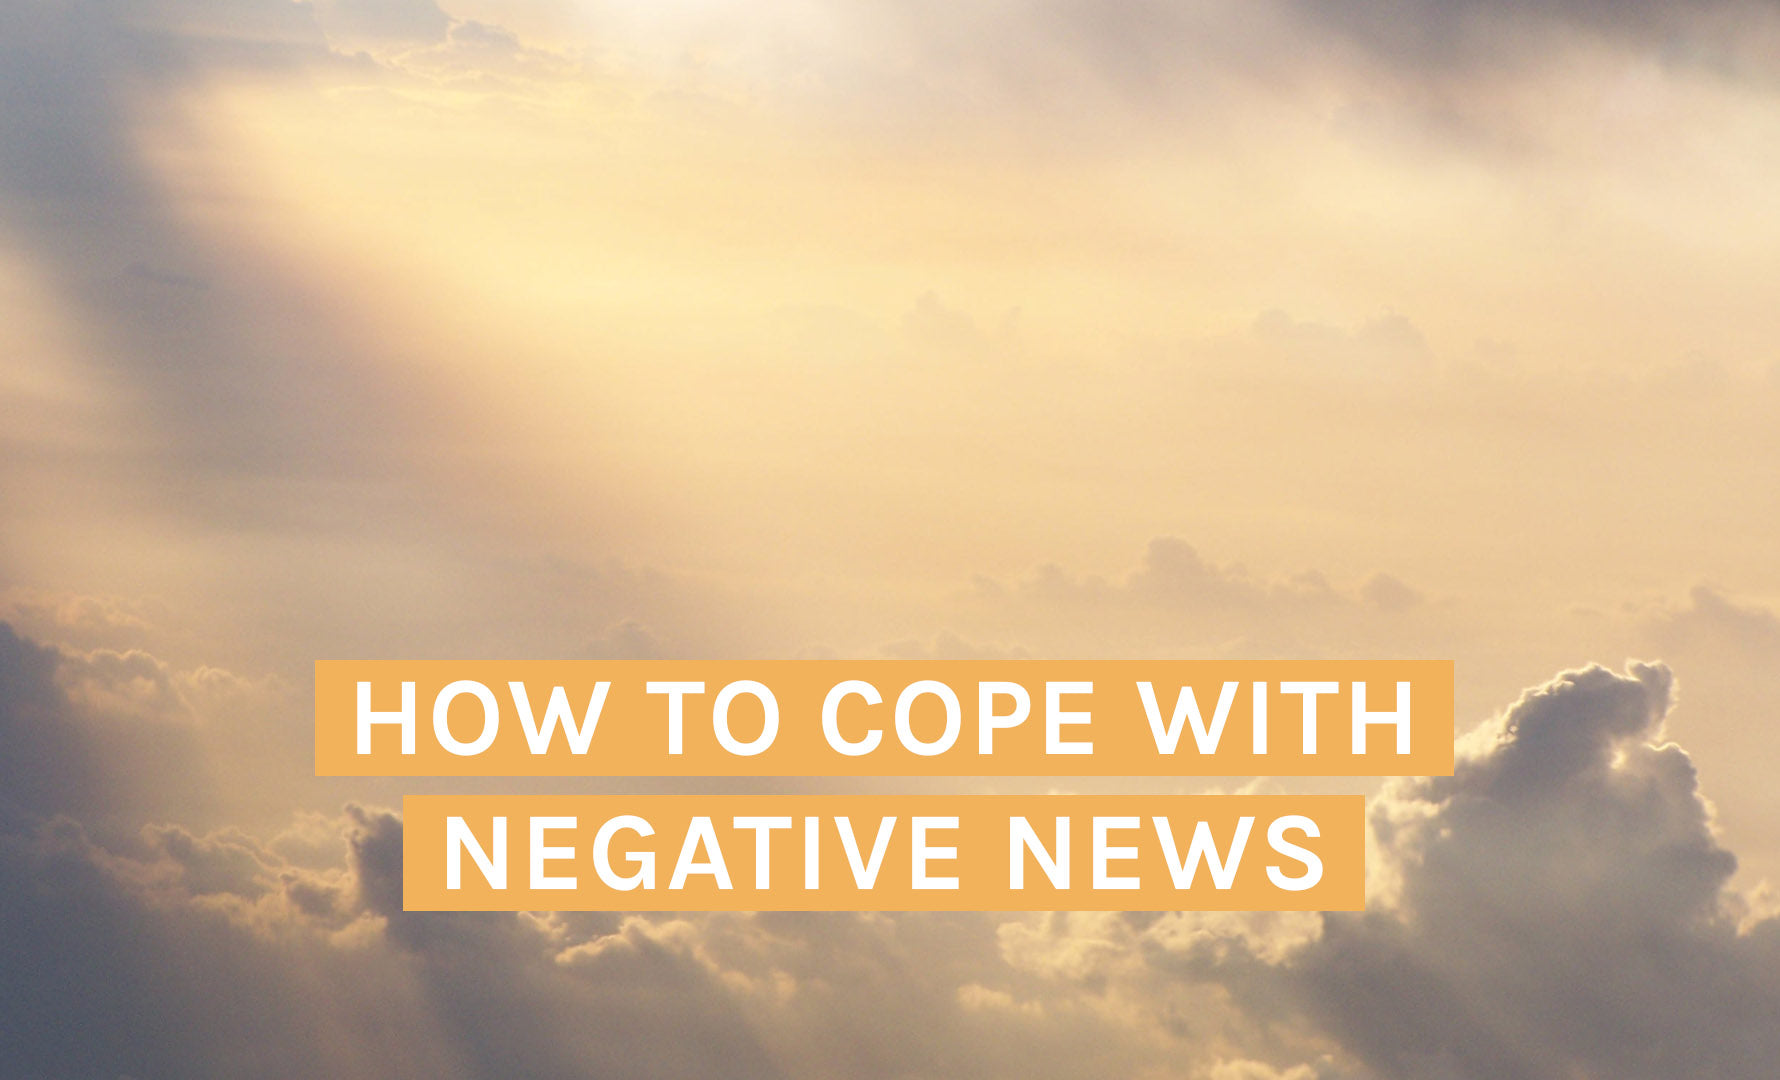 How to Cope With Negative News